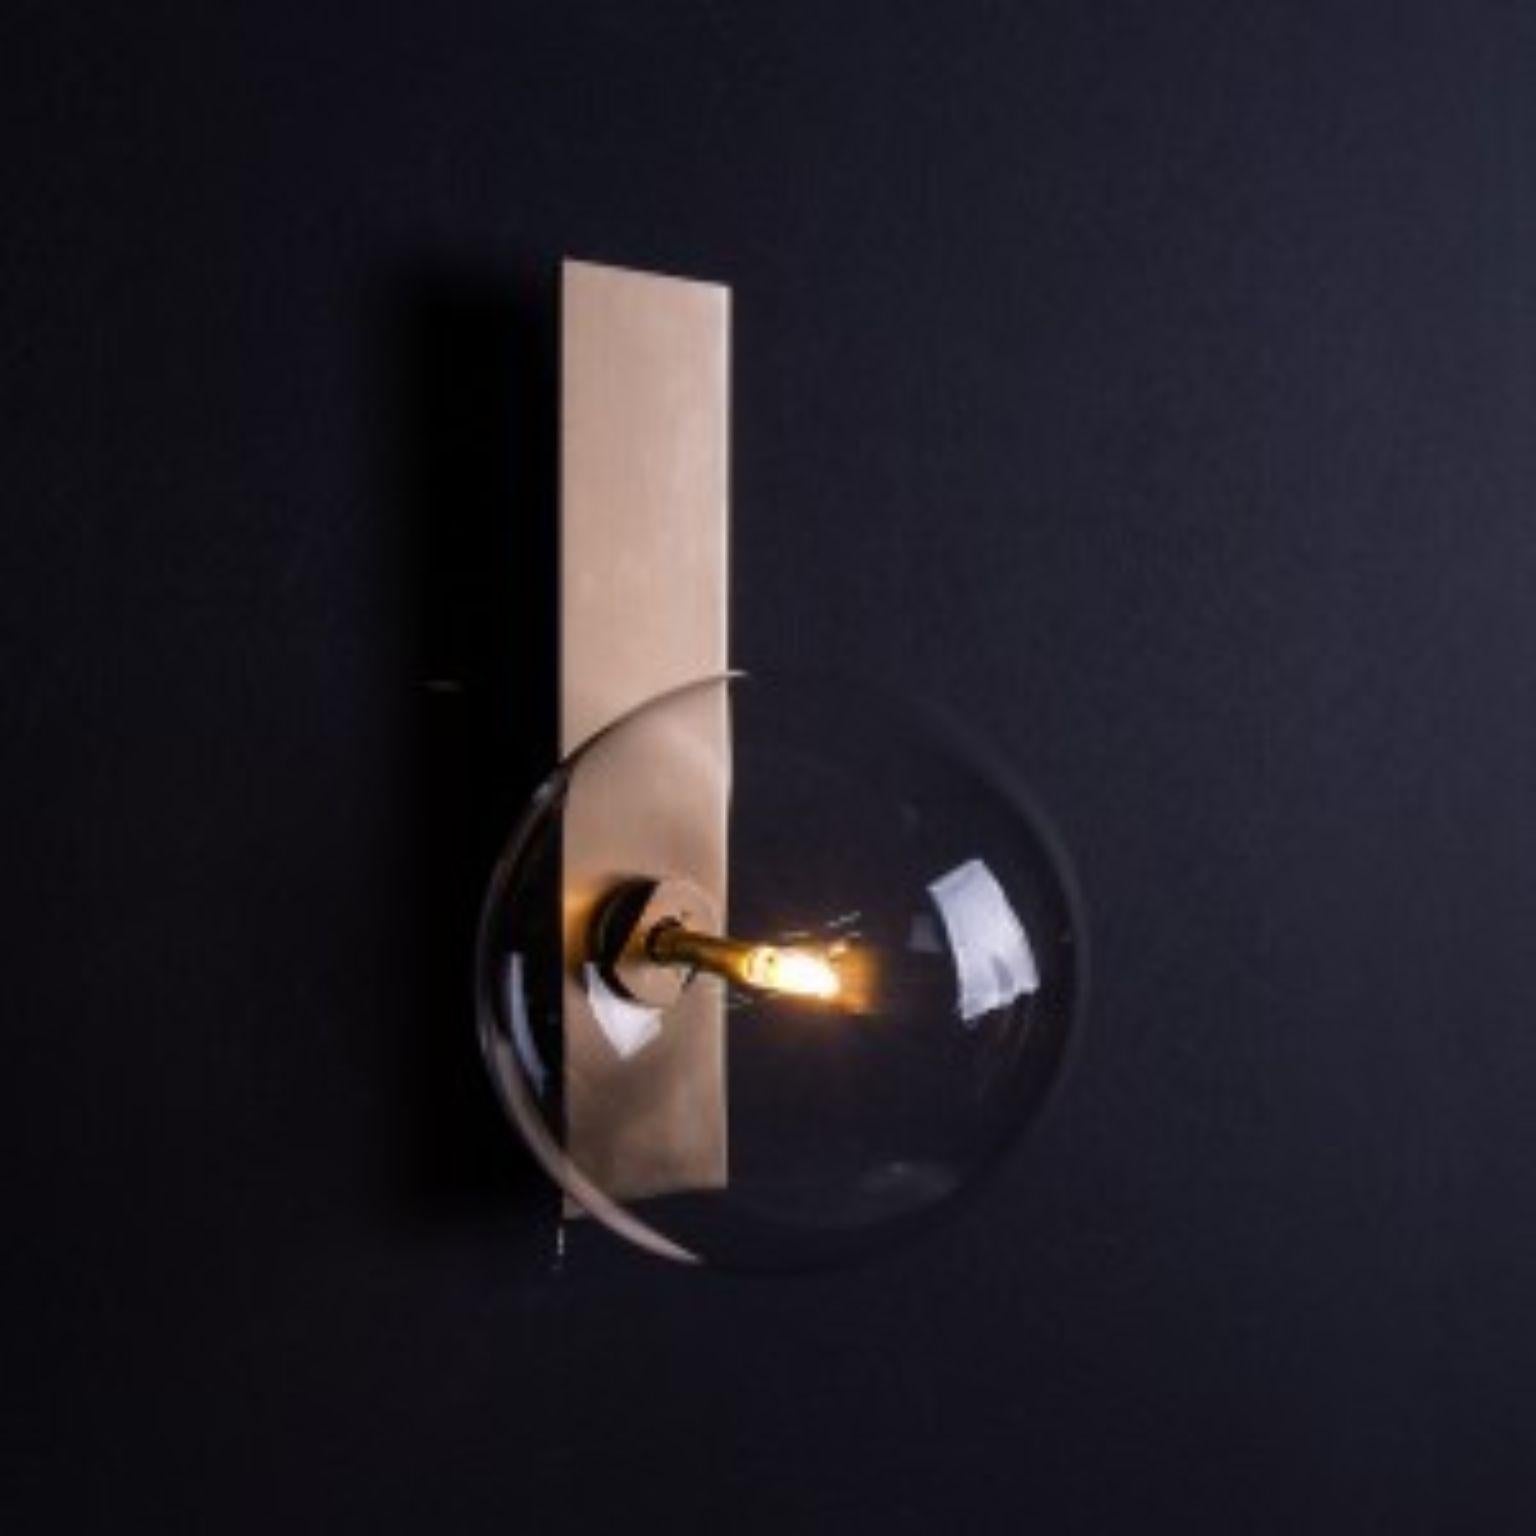 Oslo brass wall sconce by Schwung
Dimensions: W 15 x D 19 x H 26 cm
Materials: Brass, hand blown glass globes

Finishes available: Black gunmetal, polished nickel, brass


Schwung is a German word, and loosely defined, means energy or